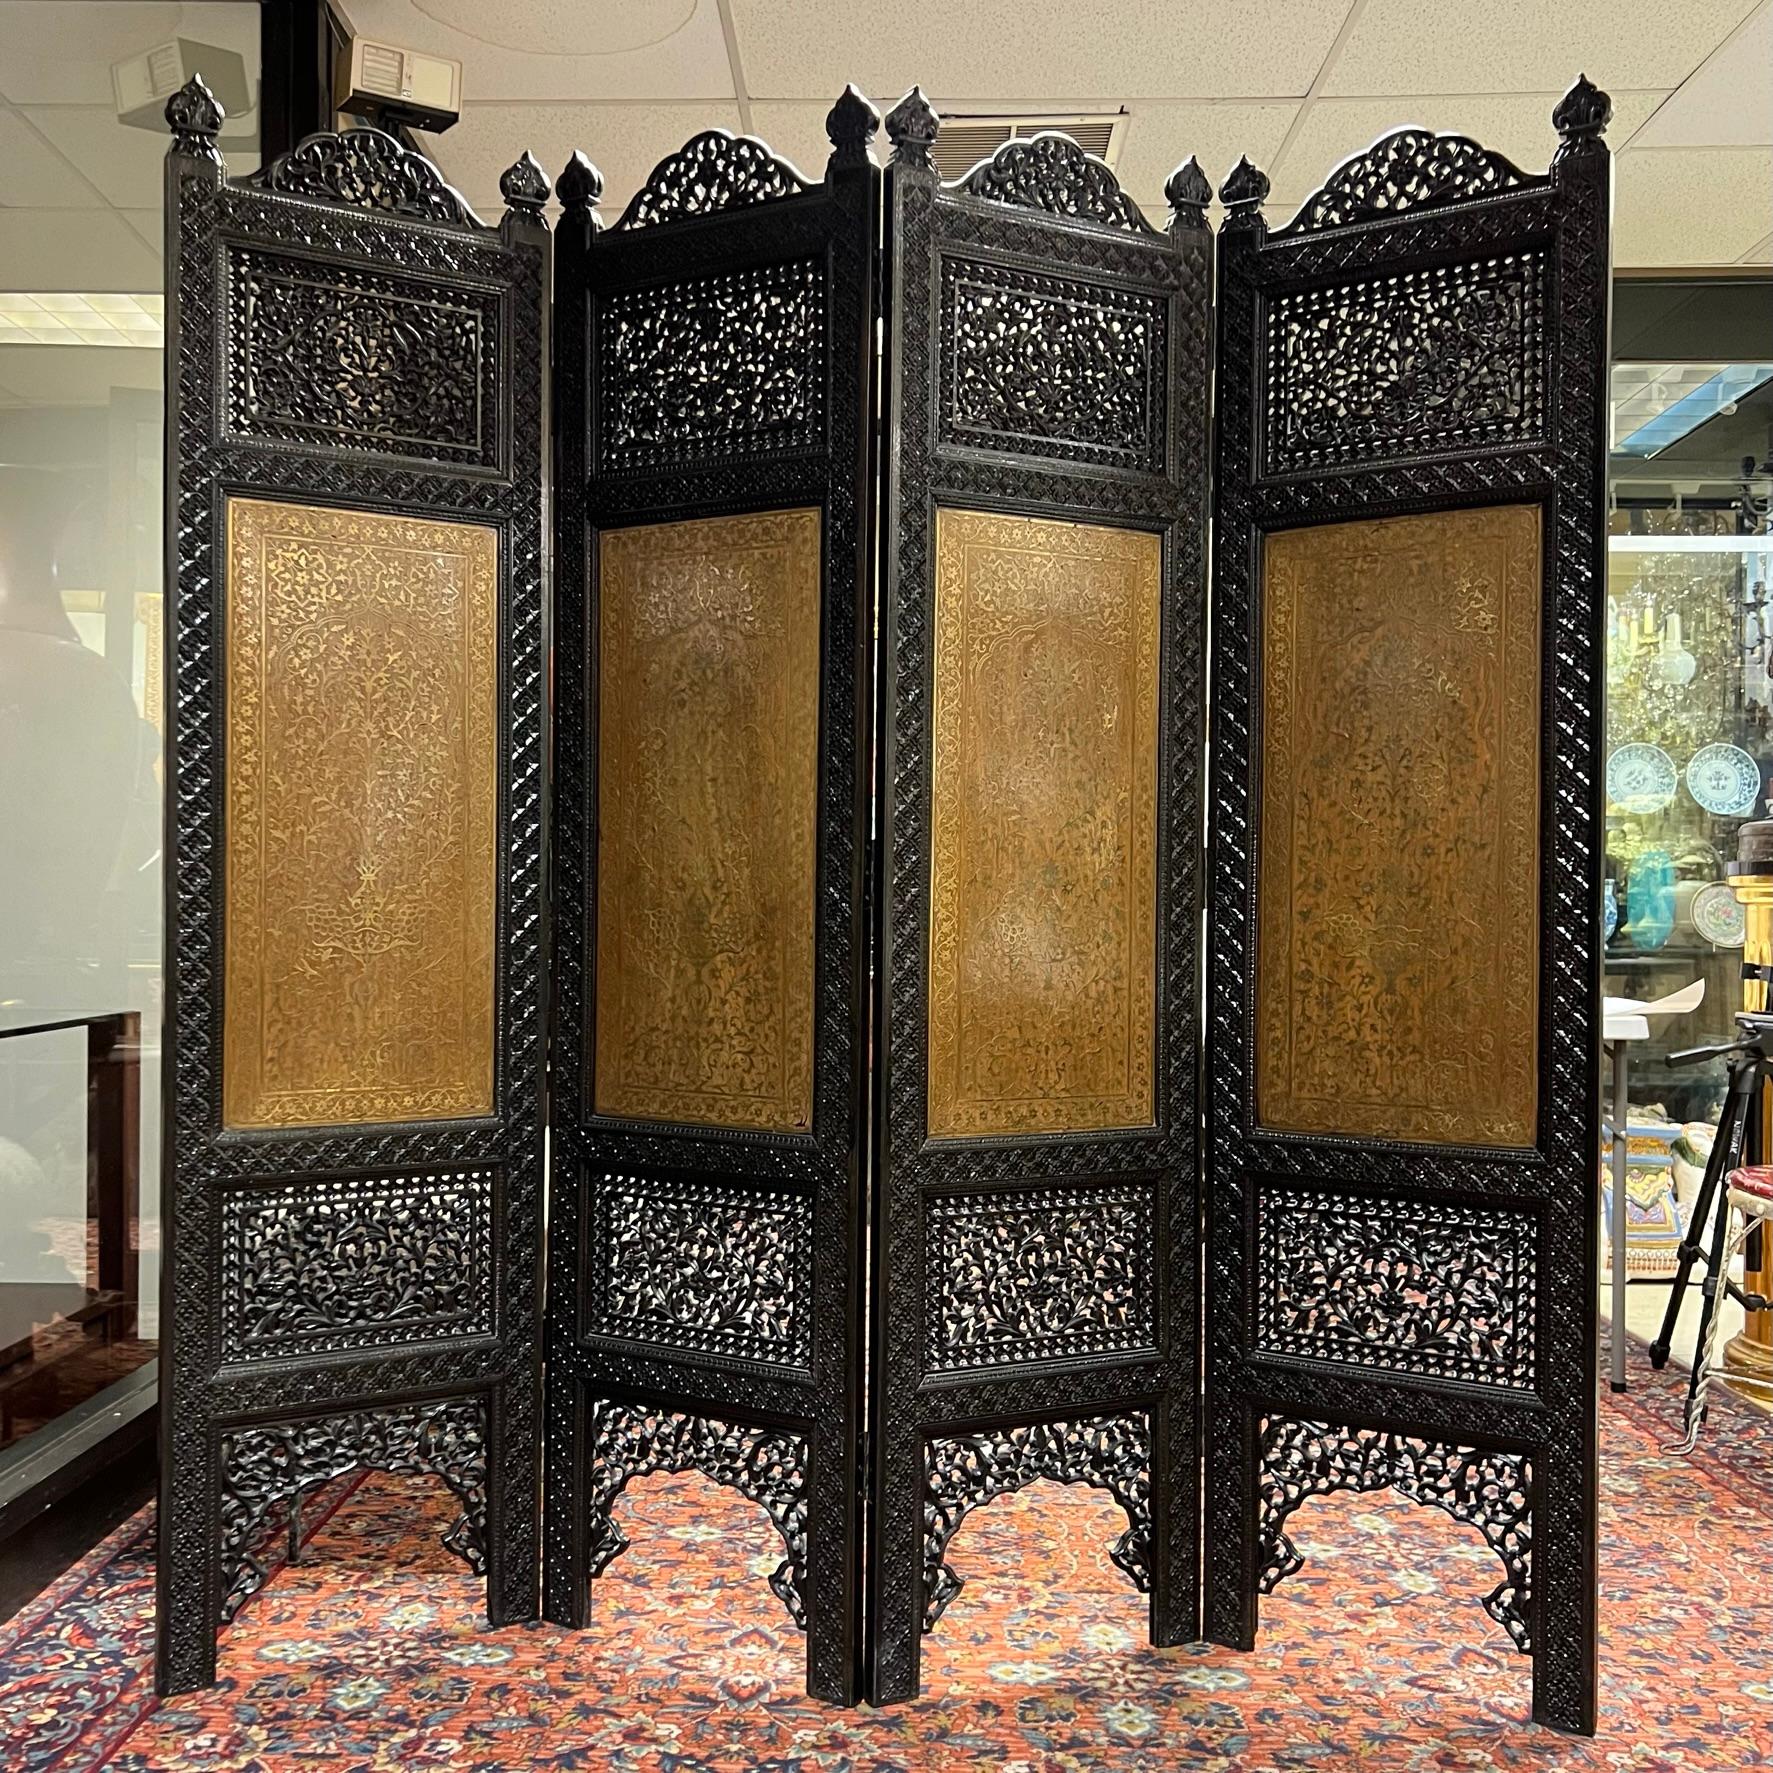 Exceptional room divider with finely carved floral openwork, inlaid brass depicting floral arabesque designs, fleur-de-lis finials and painted black finish.  Four panels each measuring 18 3/4 inches wide and 75 1/2 inches tall.